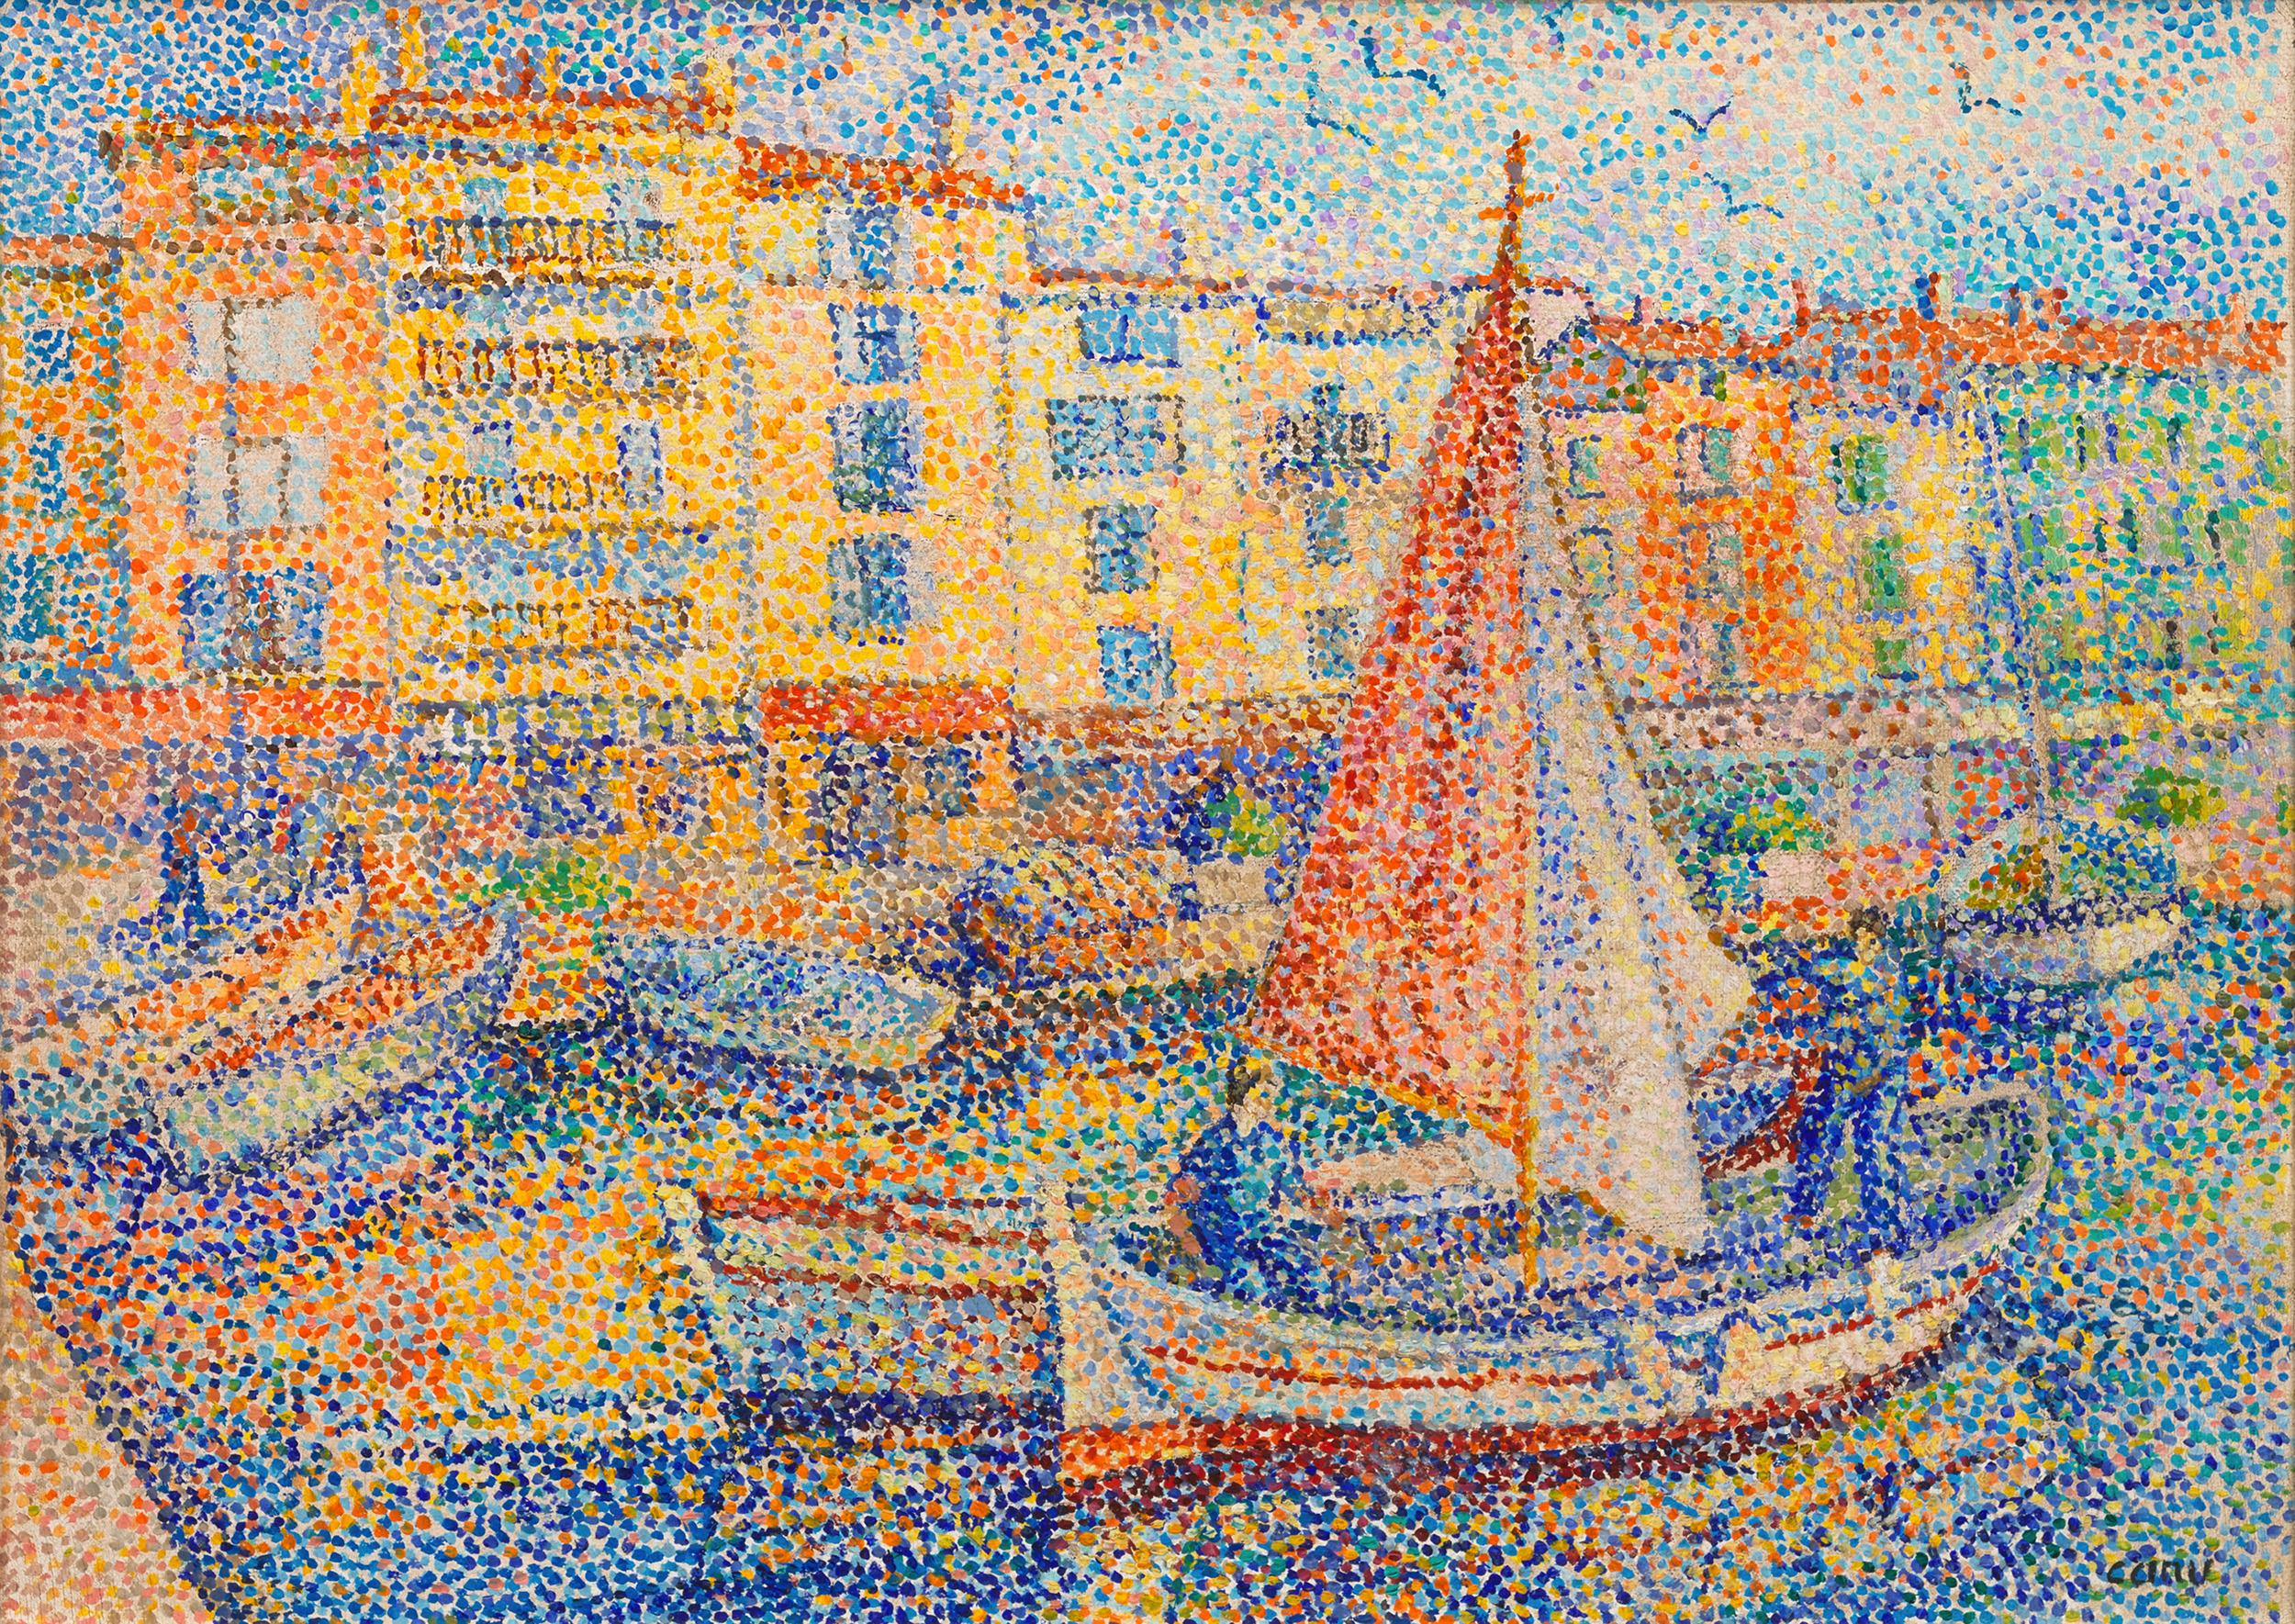 Yvonne Canu
1921-2008  French

Fishing Boats in St. Tropez

Signed "CANU" on lower right boat
Oil on canvas

The picturesque French Riviera is presented in French Post-Impressionist Yvonne Canu's signature Pointillist style. The leisurely harbor